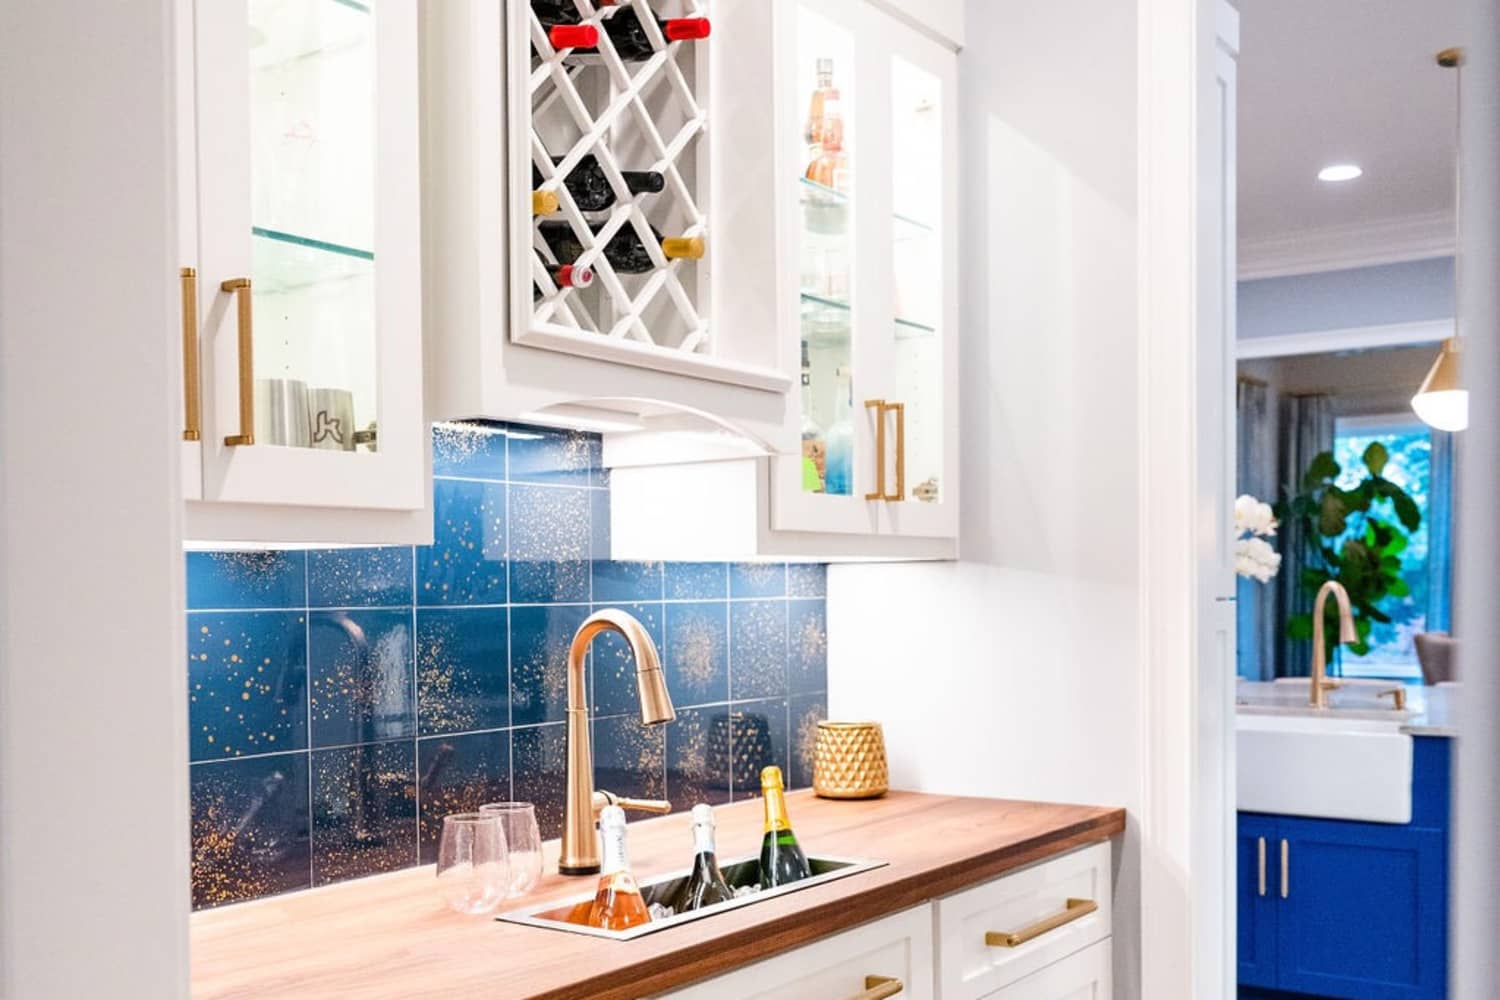 6 Ways Homeowners Are Renovating Their Kitchens for Better Entertaining – 2022